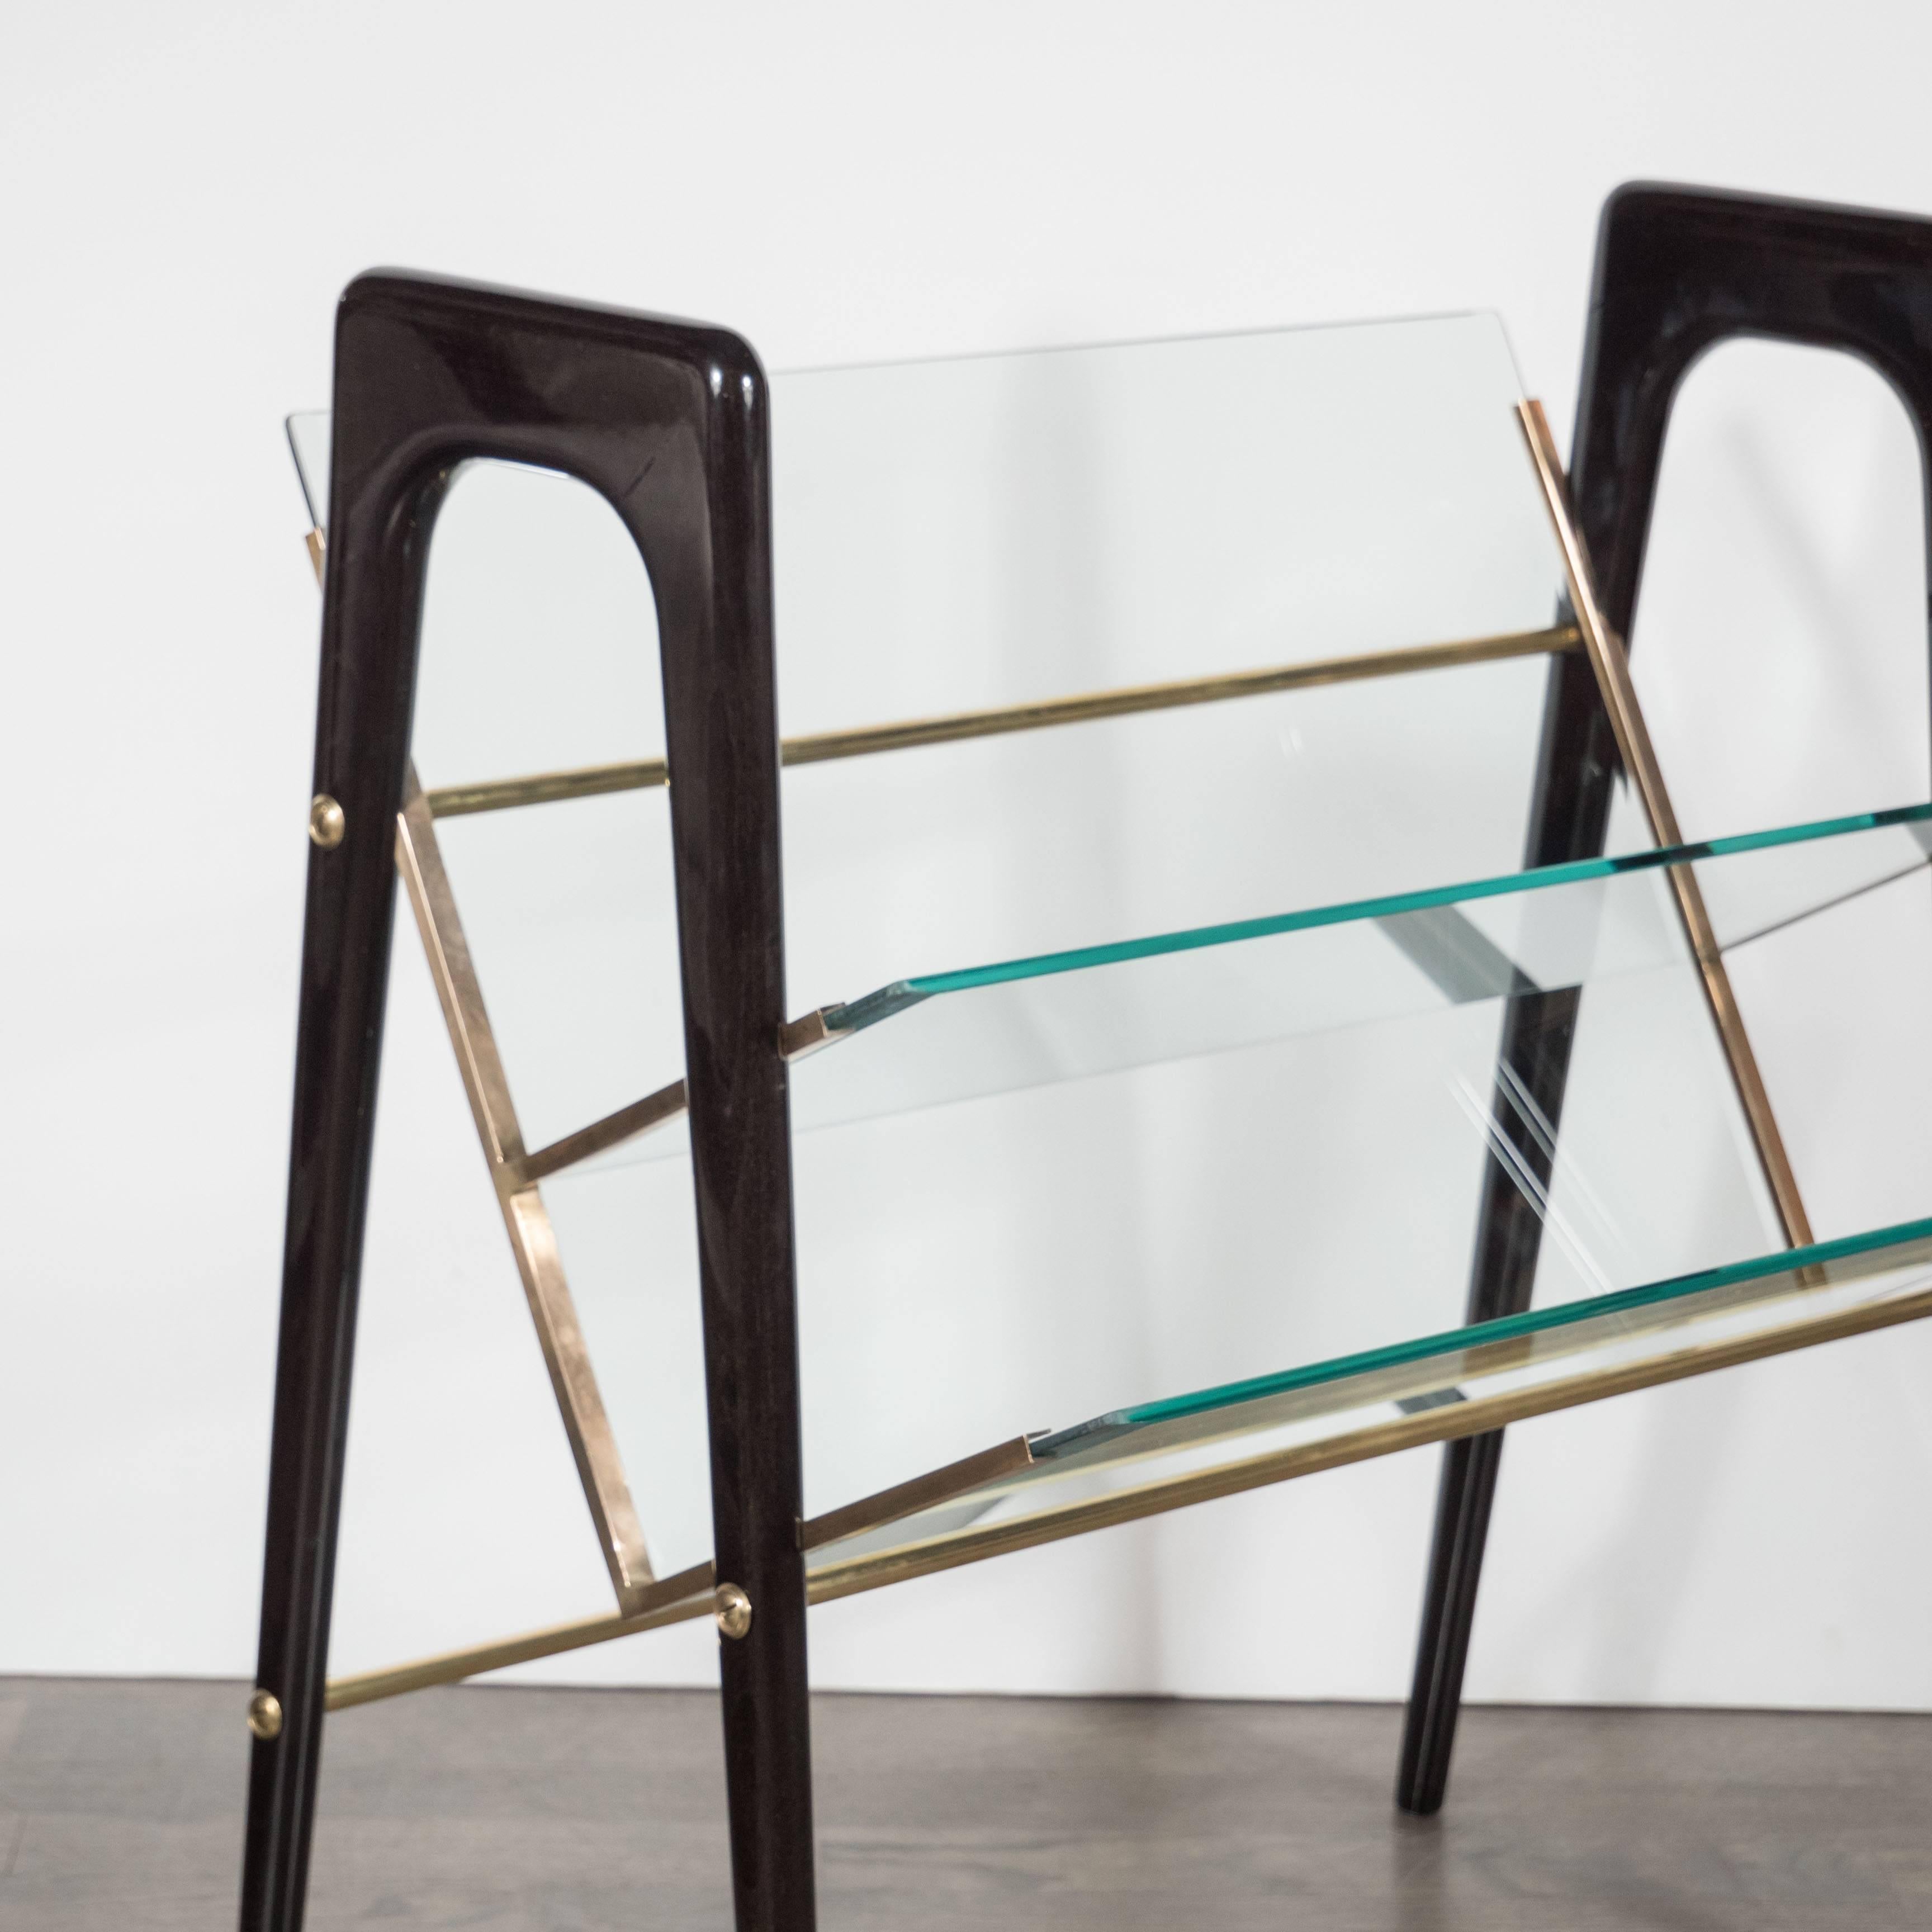 A Mid-Century modernist magazine stand in ebonized walnut, polished brass and glass in the manner of Ico Parisi. Round curved edges support two separate glass shelves which can hold magazines or books. A brass frame supports the shelves. This piece